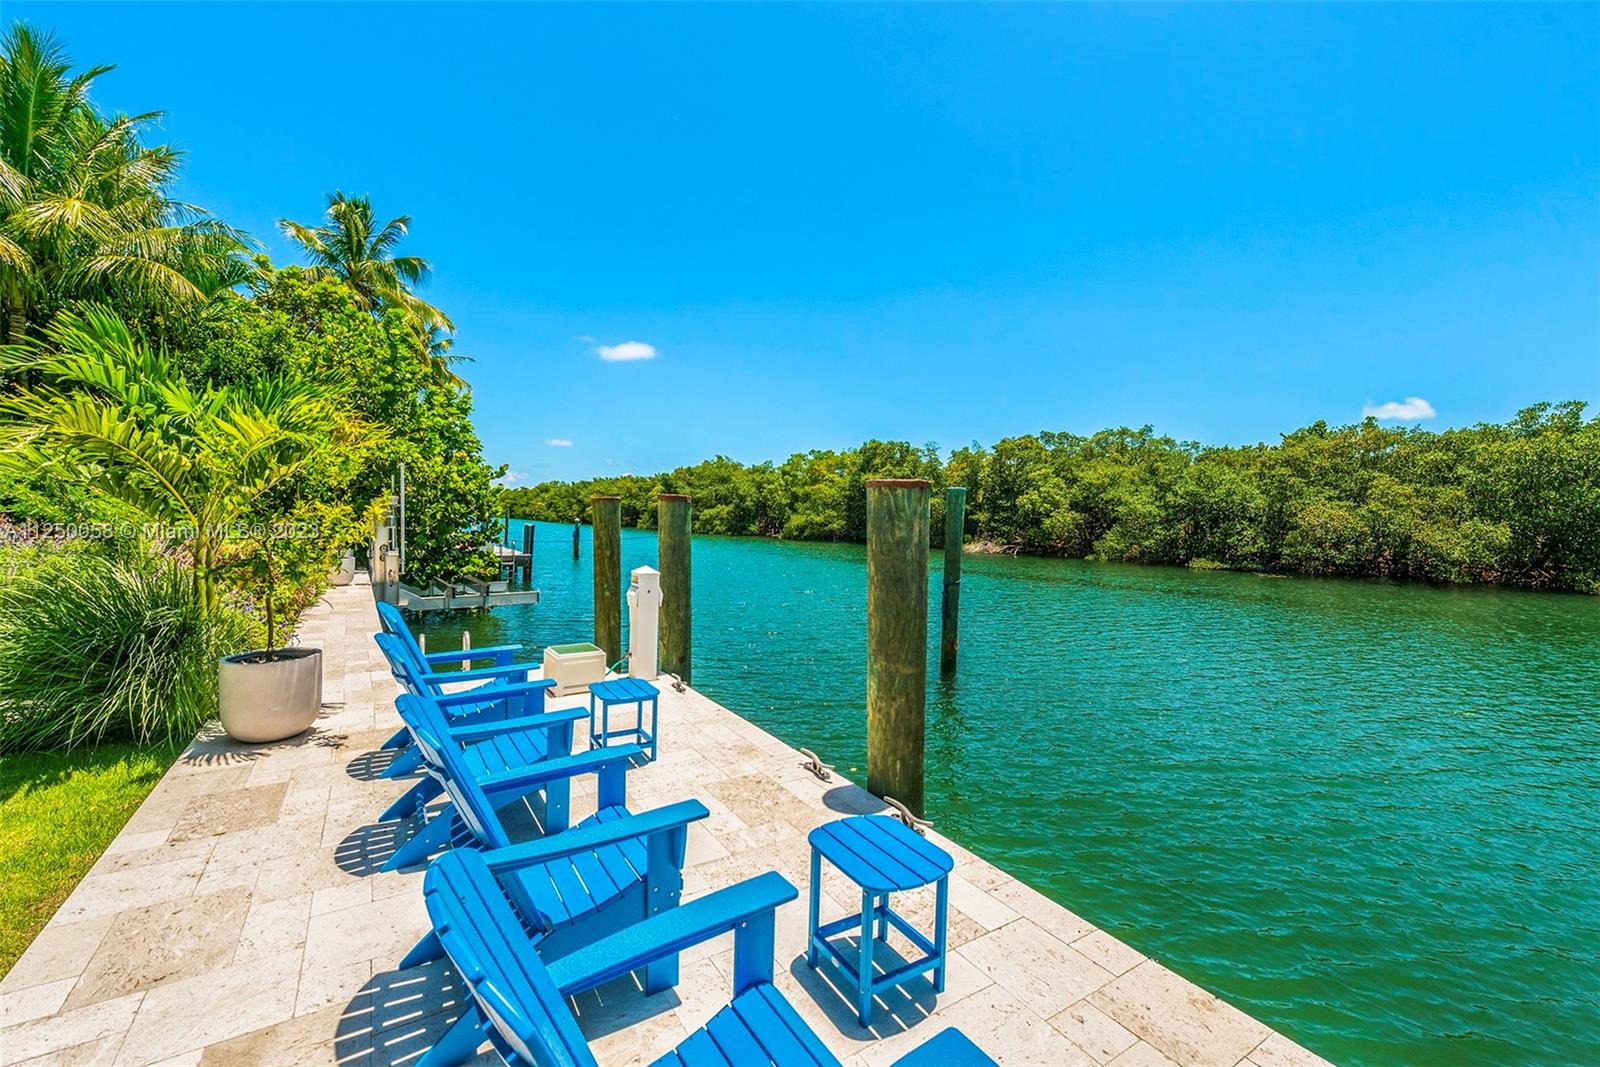 THE FINEST OF NEW WATERFRONT LIVING. 6 BEDROOMS AND 6 BATHS AND 2 HALF BATHS IN OVER 10,000 SQUARE FEET ON THE PINES CANAL LOT OF 18,600 SQUARE FEET. CUSTOM BUILT IN 2018 WITH ALL THE CUSTOM UPGRADES YOU CAN THINK OF, INCLUDING A 15,000 CAPACITY BOAT LIFT, A PRIVATE DOCK, FULL HOUSE 110K W GENERATOR WITH AUTOMATIC TRANSFER SWITCH, CONTROL4 SMART HOME SYSTEM, CONCRETE ROOF, HIGH CEILINGS, ITALKRAFT KITCHEN WITH HIGH END APPLIANCES FEATURING INDUCTION AND GAS AND 4 OVENS AND A FULL ITALKRAFT CATERING /PREP KITCHEN, WINE CELLAR, TWO ITALKRAFT LAUNDRY ROOMS (ONE UPSTAIRS, ONE DOWNSTAIRS), TWO COVERED PATIOS WITH AUTOMATIC SCREENS, HOME IS ELEVATOR READY, LARGE GARAGE WITH AC AND SEPARATE GOLF CART GARAGE, CENTRAL VACUUM SYSTEM, FULL HOUSE ELECTRICAL THROUGH CONDUIT, AND SO MUCH MORE.